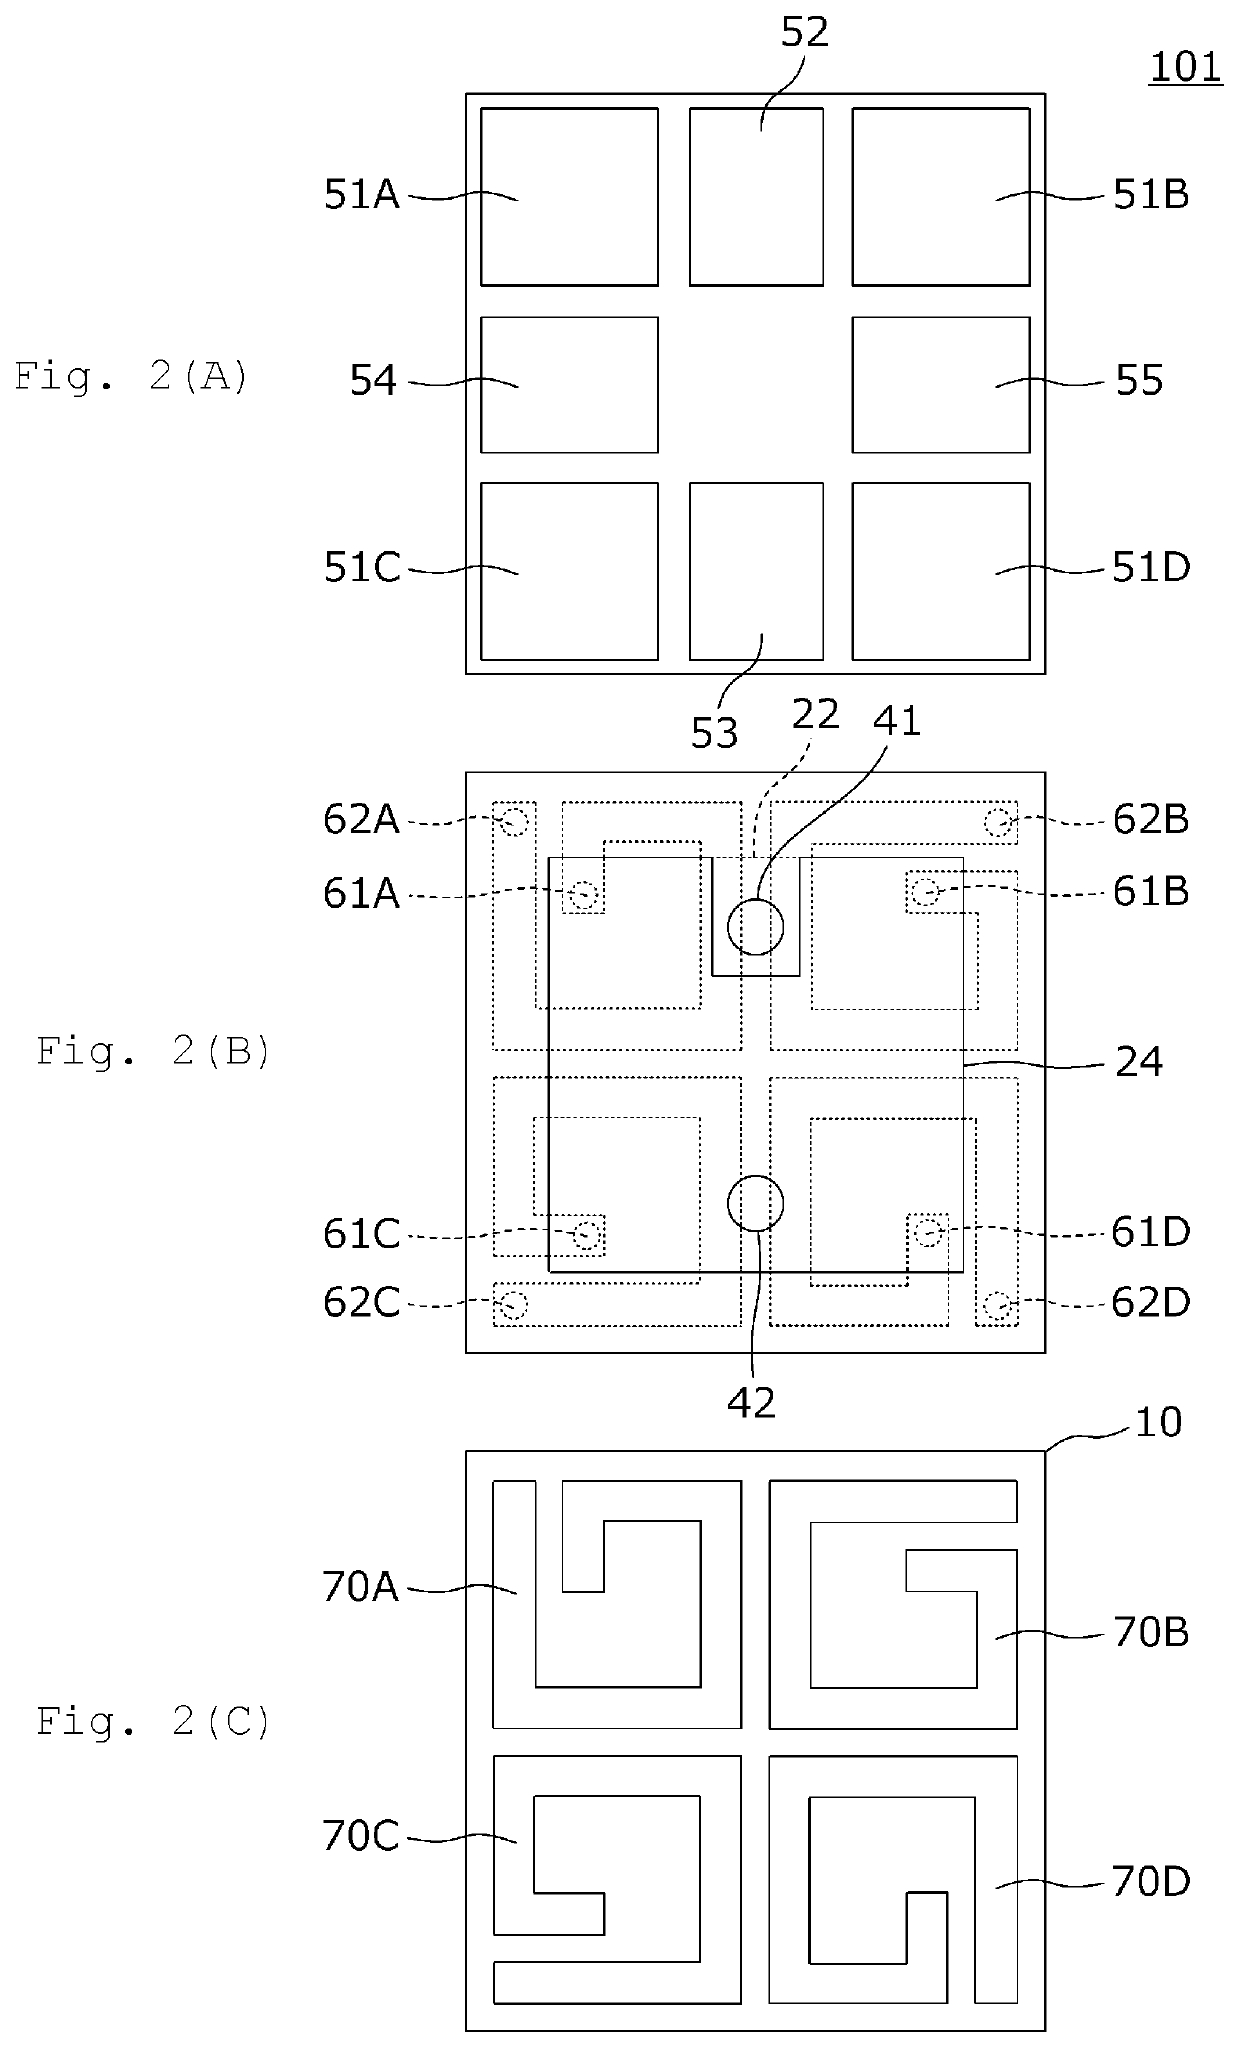 Surface-mounted LC device